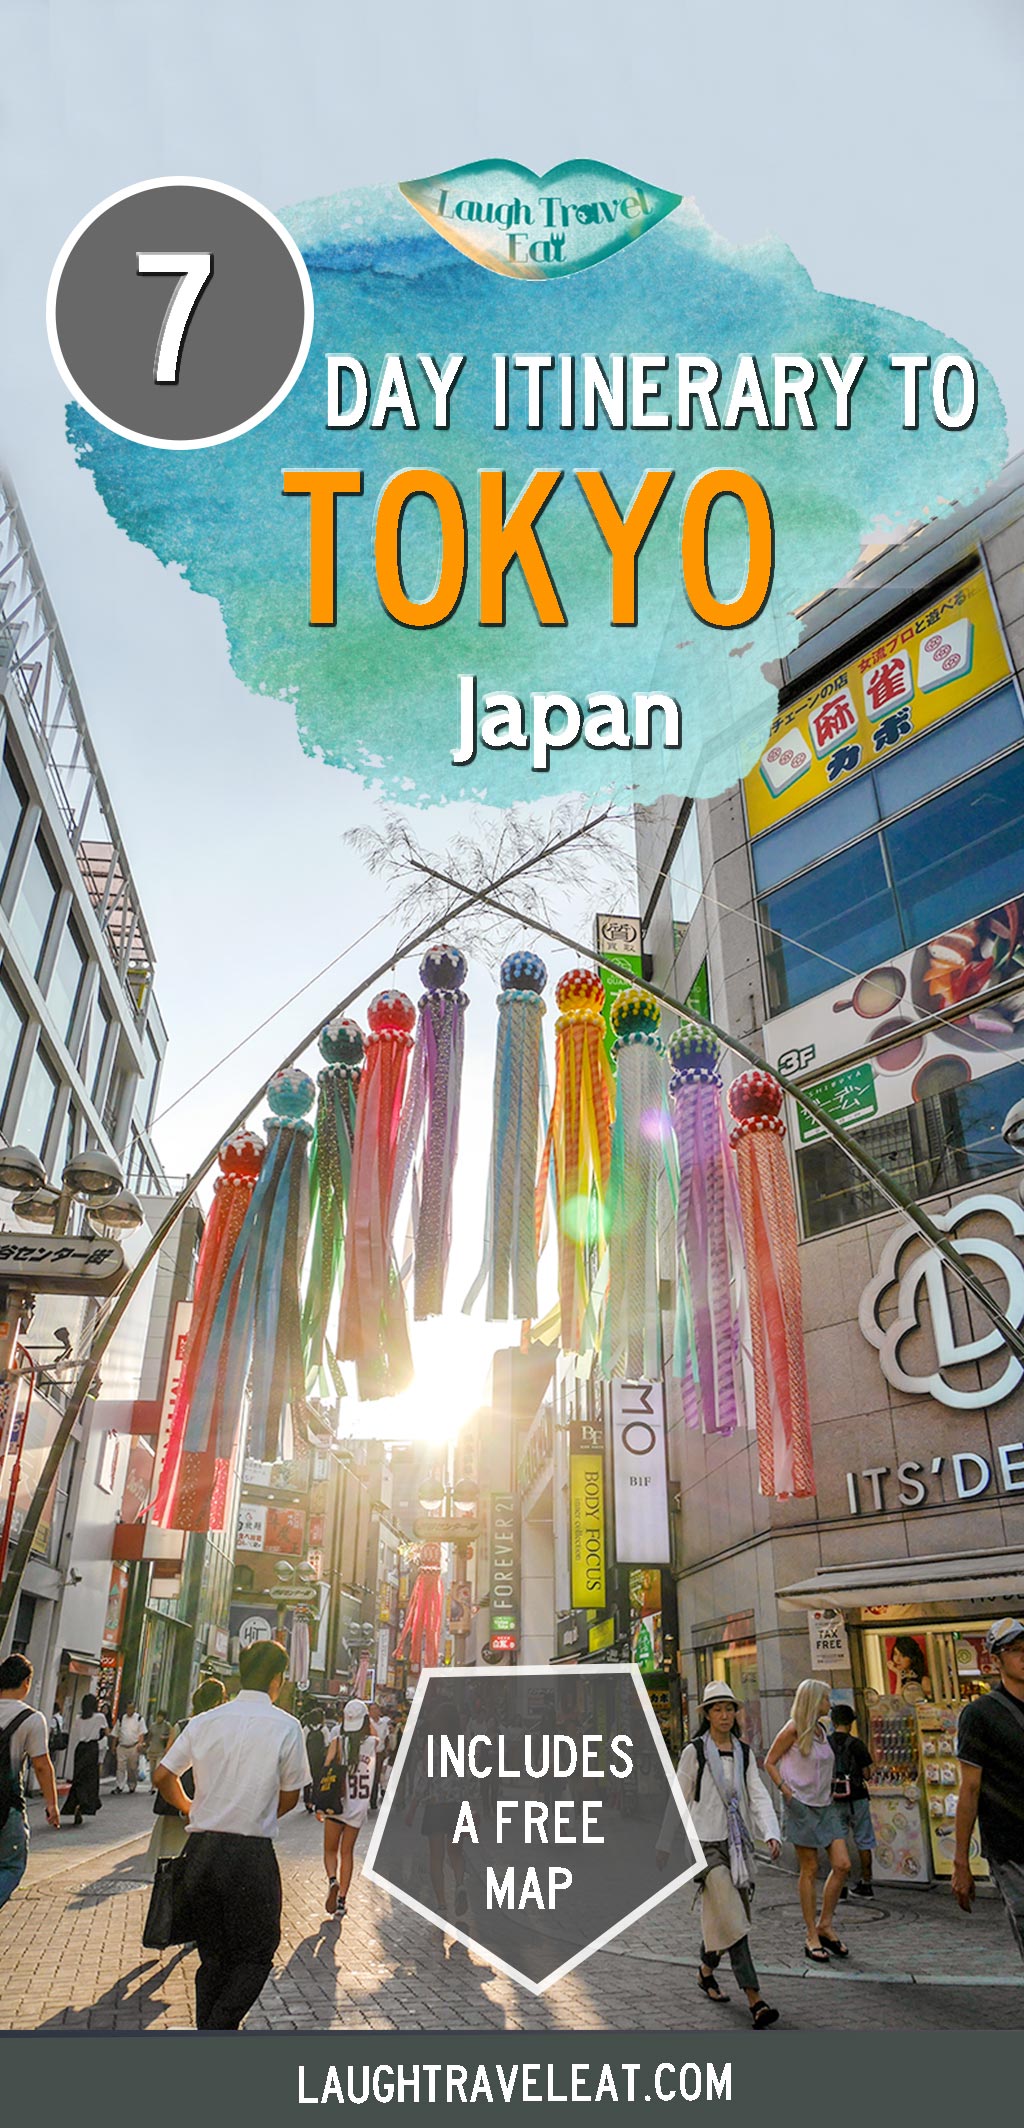 Tokyo is so full of activities that it's hard to decide on an itinerary. But if you like eating, shopping, hiking, here's a 7 day itinerary